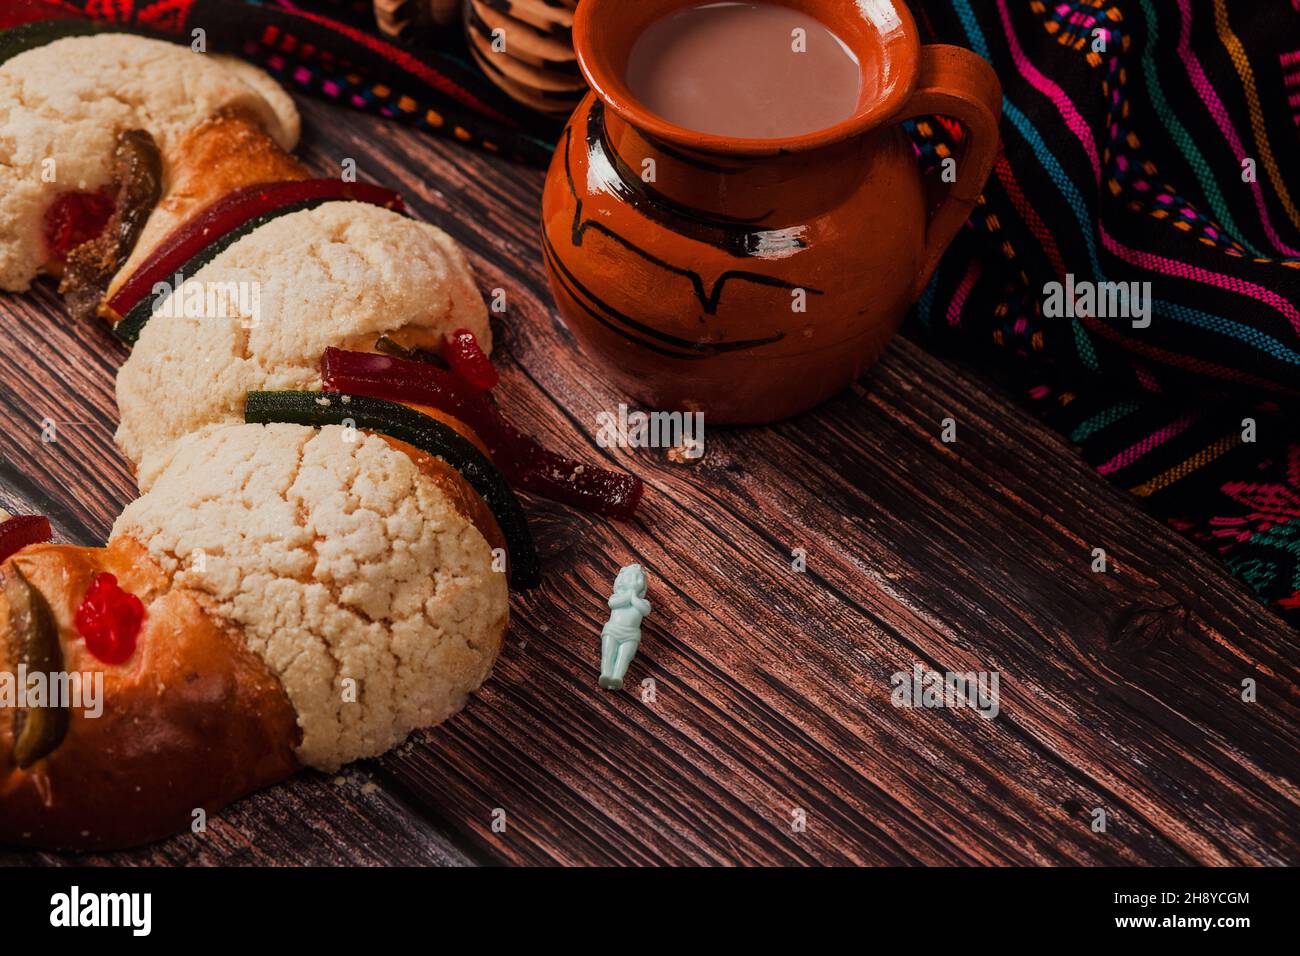 Rosca de reyes or Epiphany cake and clay mug of mexican hot chocolate on wooden table in Mexico Latin America Stock Photo